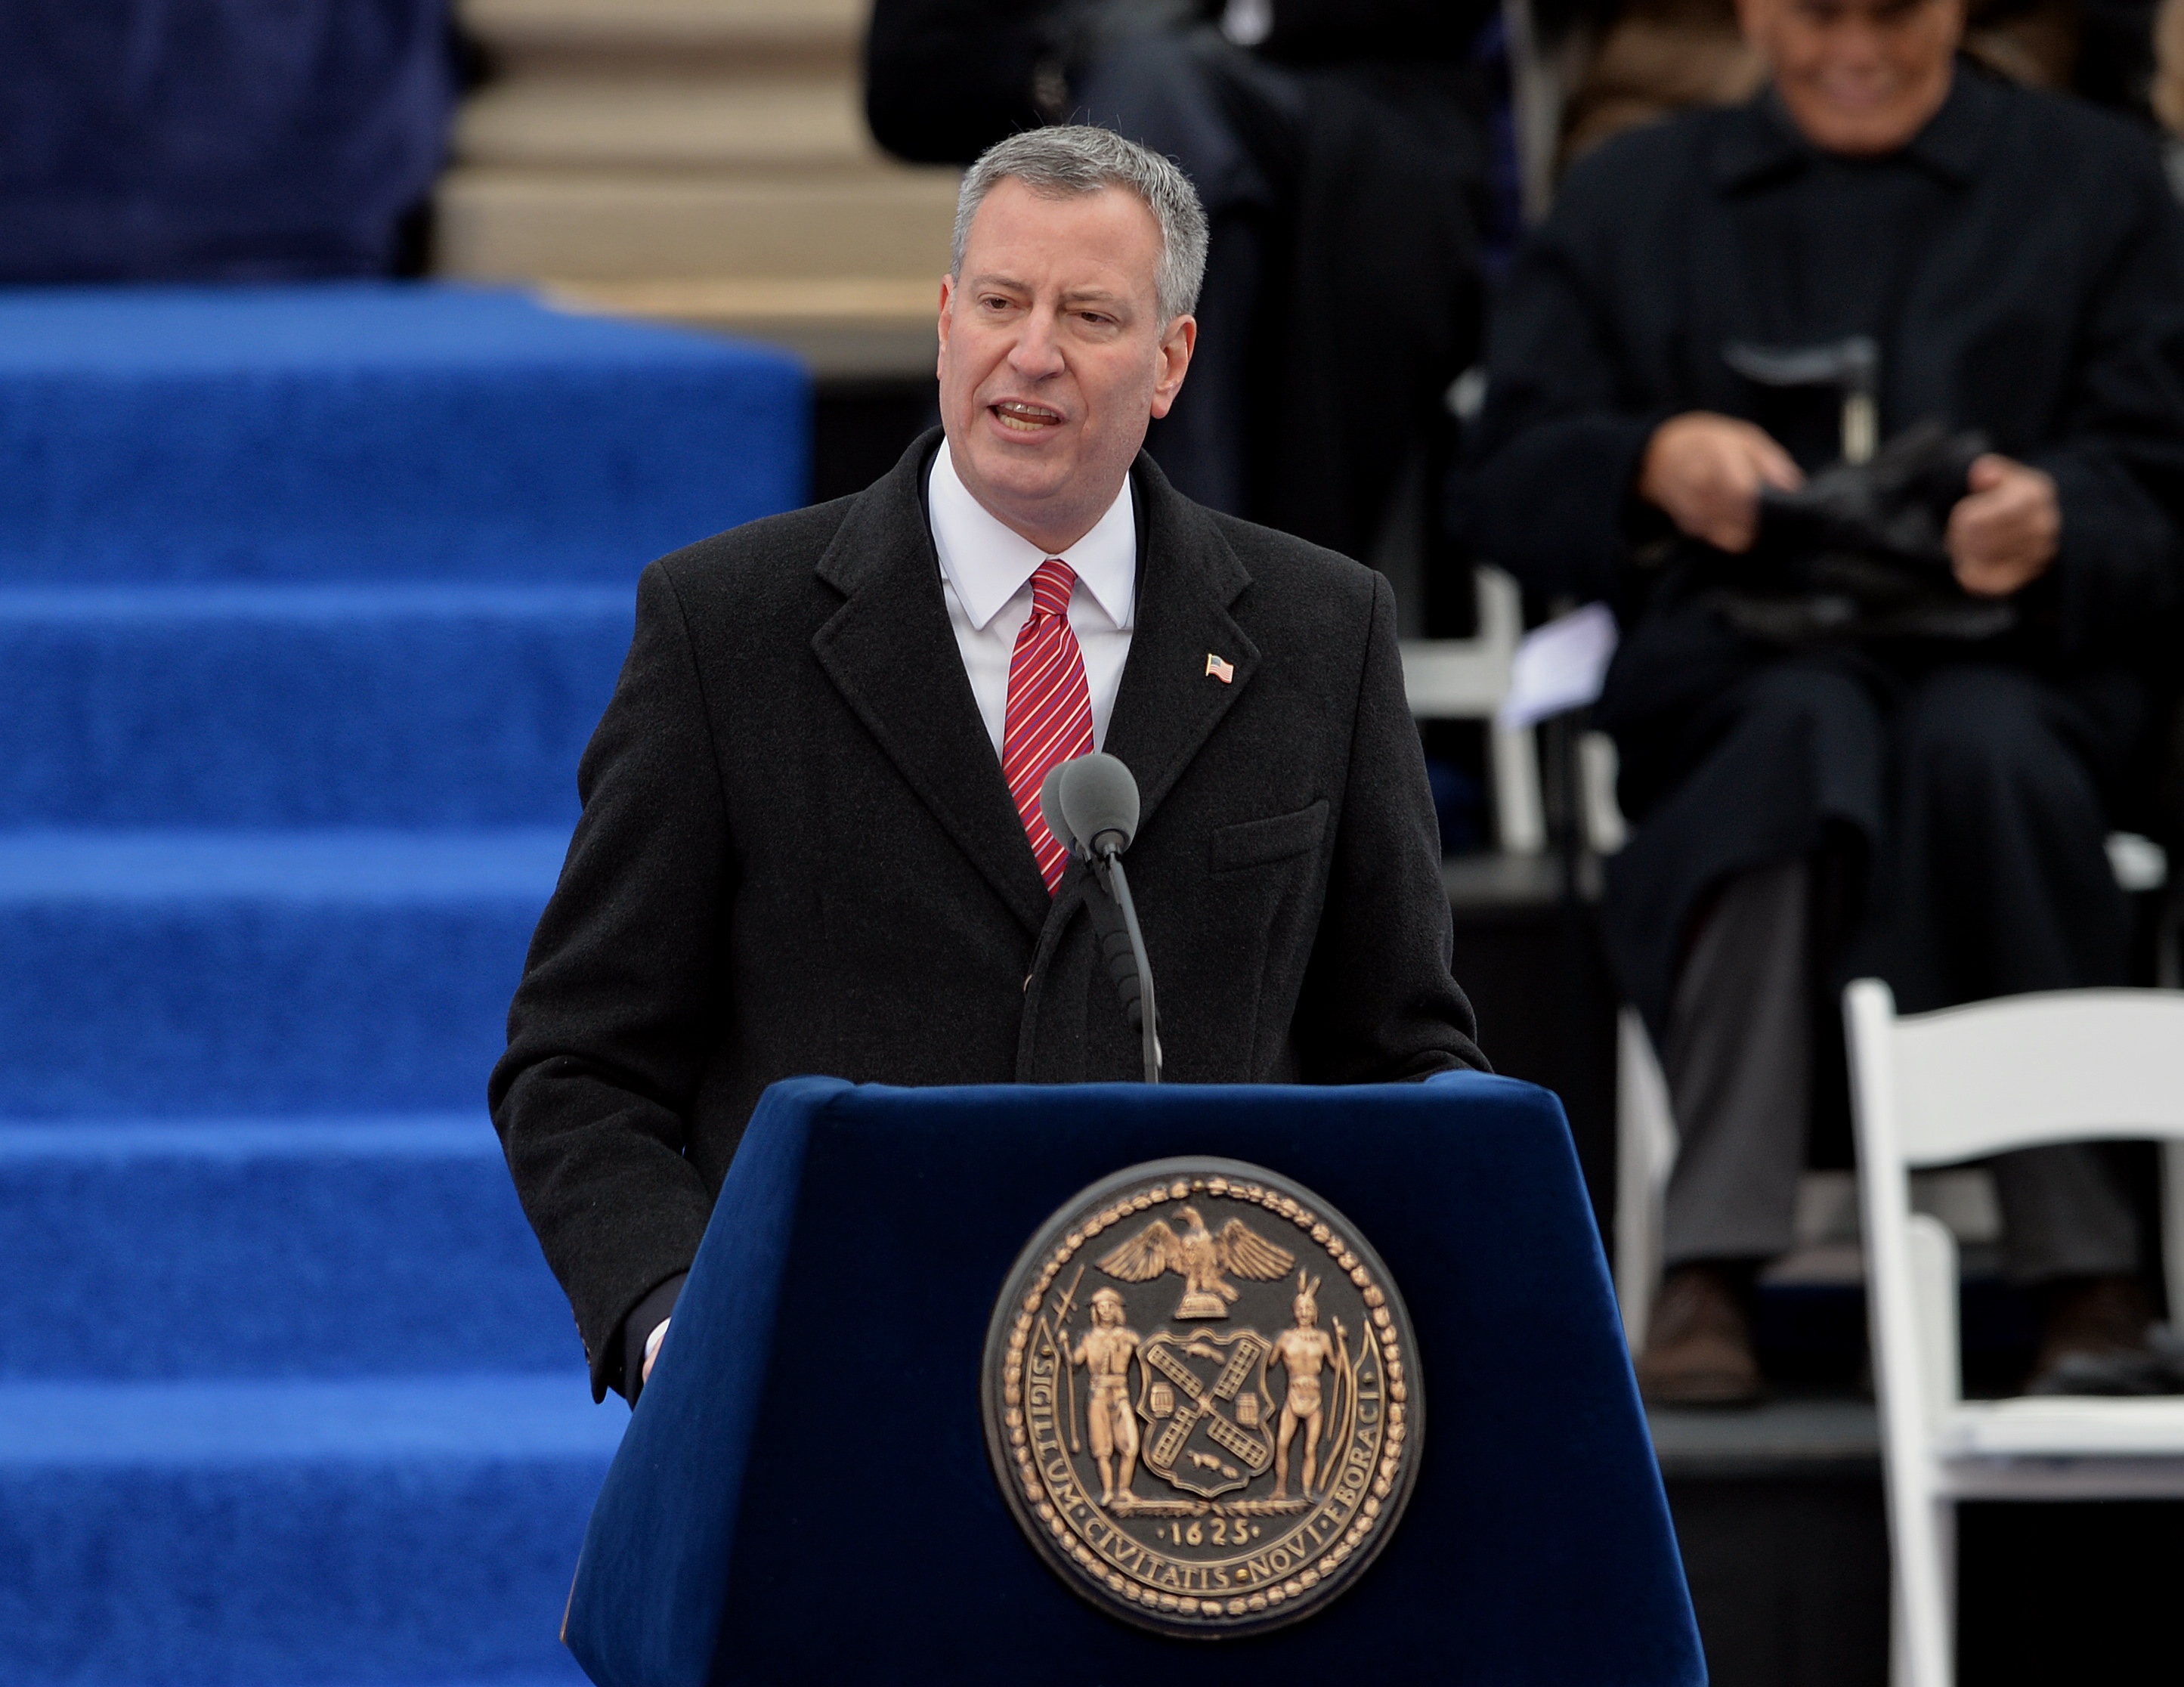 New York City Mayor Bill de Blasio speaks after being sworn in on the steps of City Hall in Lower Manhattan January 1, 2014 in New York. (Stan Honda / AFP / Getty Images)